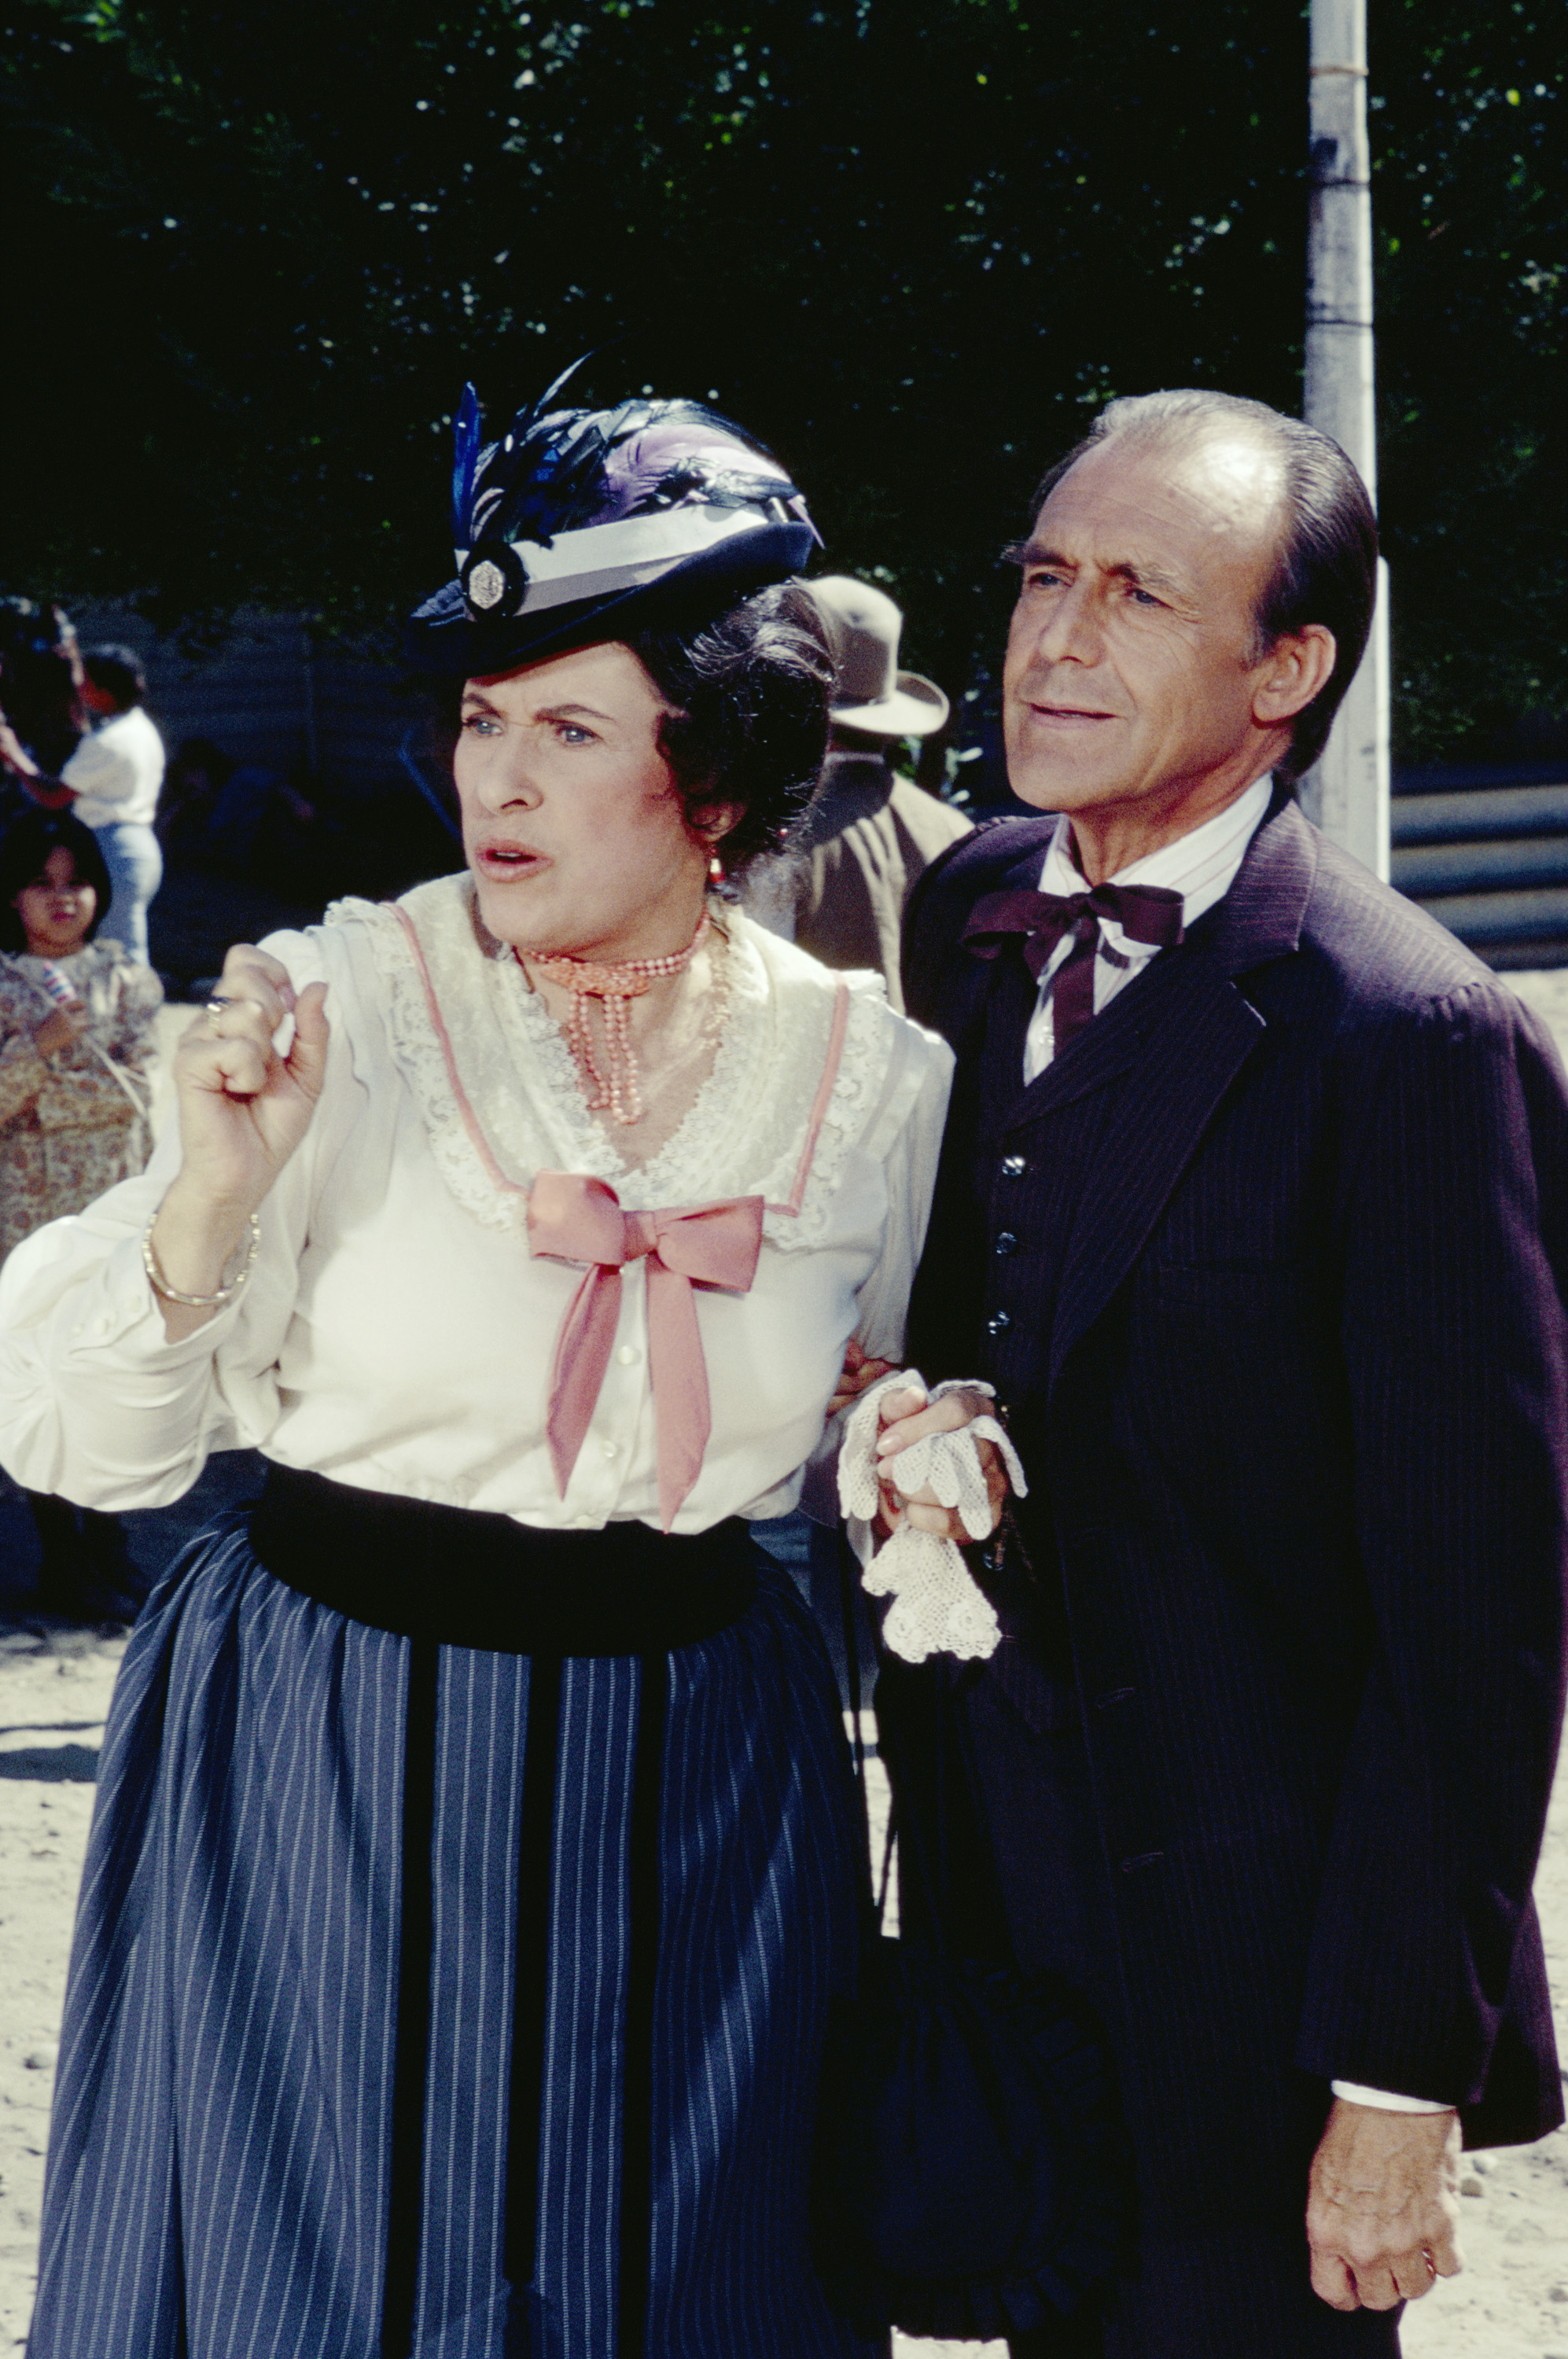 Katherine MacGregor and Richard Bull as Harriet and Nels Oleson